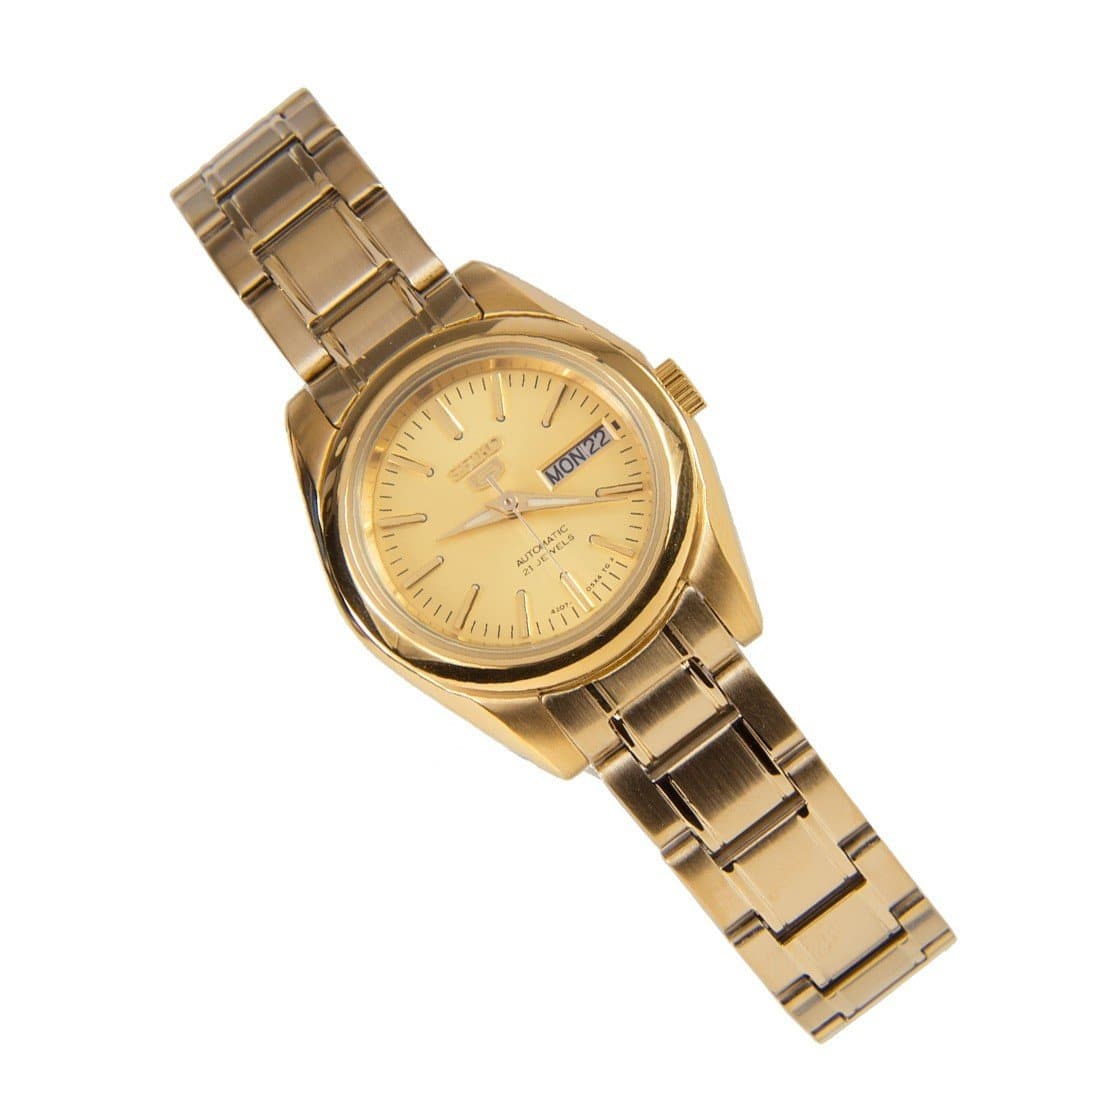 Seiko 5 Classic Ladies Size Gold Dial Gold Plated Stainless Steel Strap Watch SYMK20K1 - Diligence1International